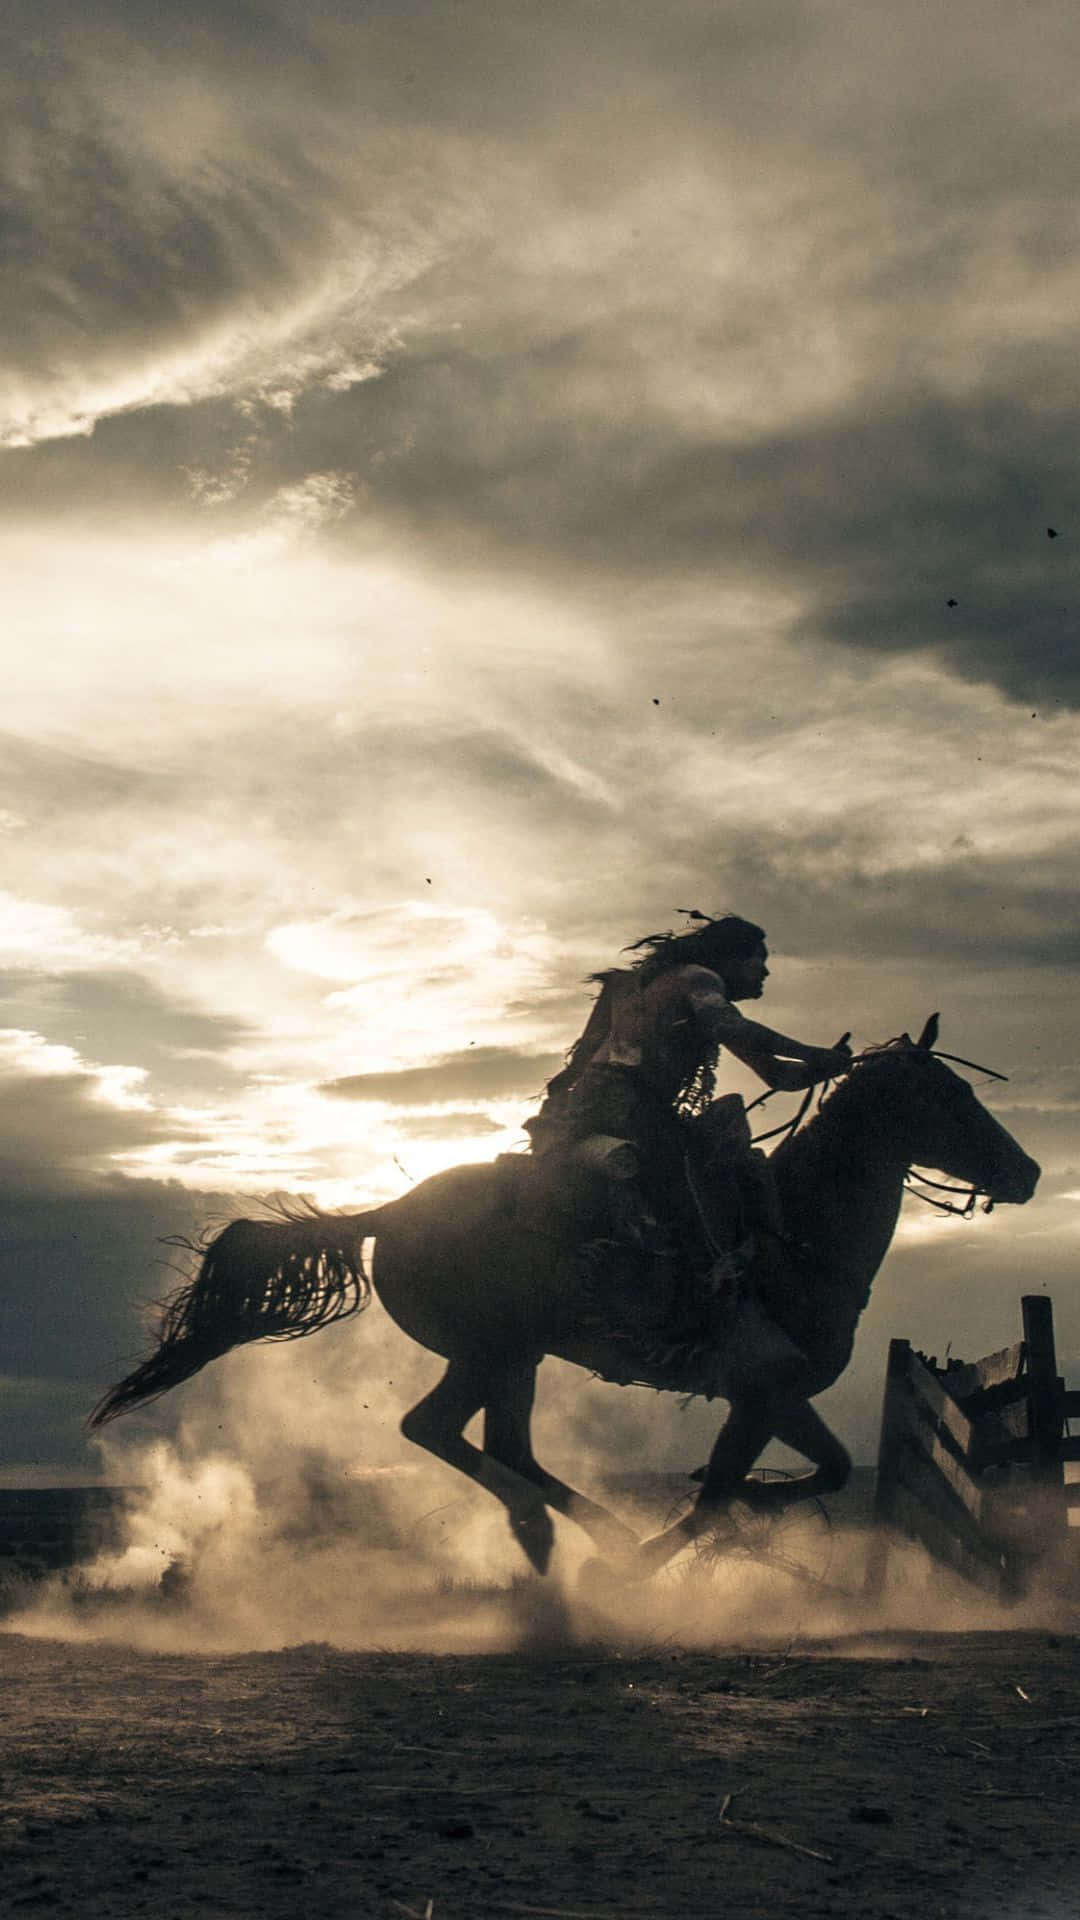 Download into the Wild West with your Cowboy iPhone Wallpaper